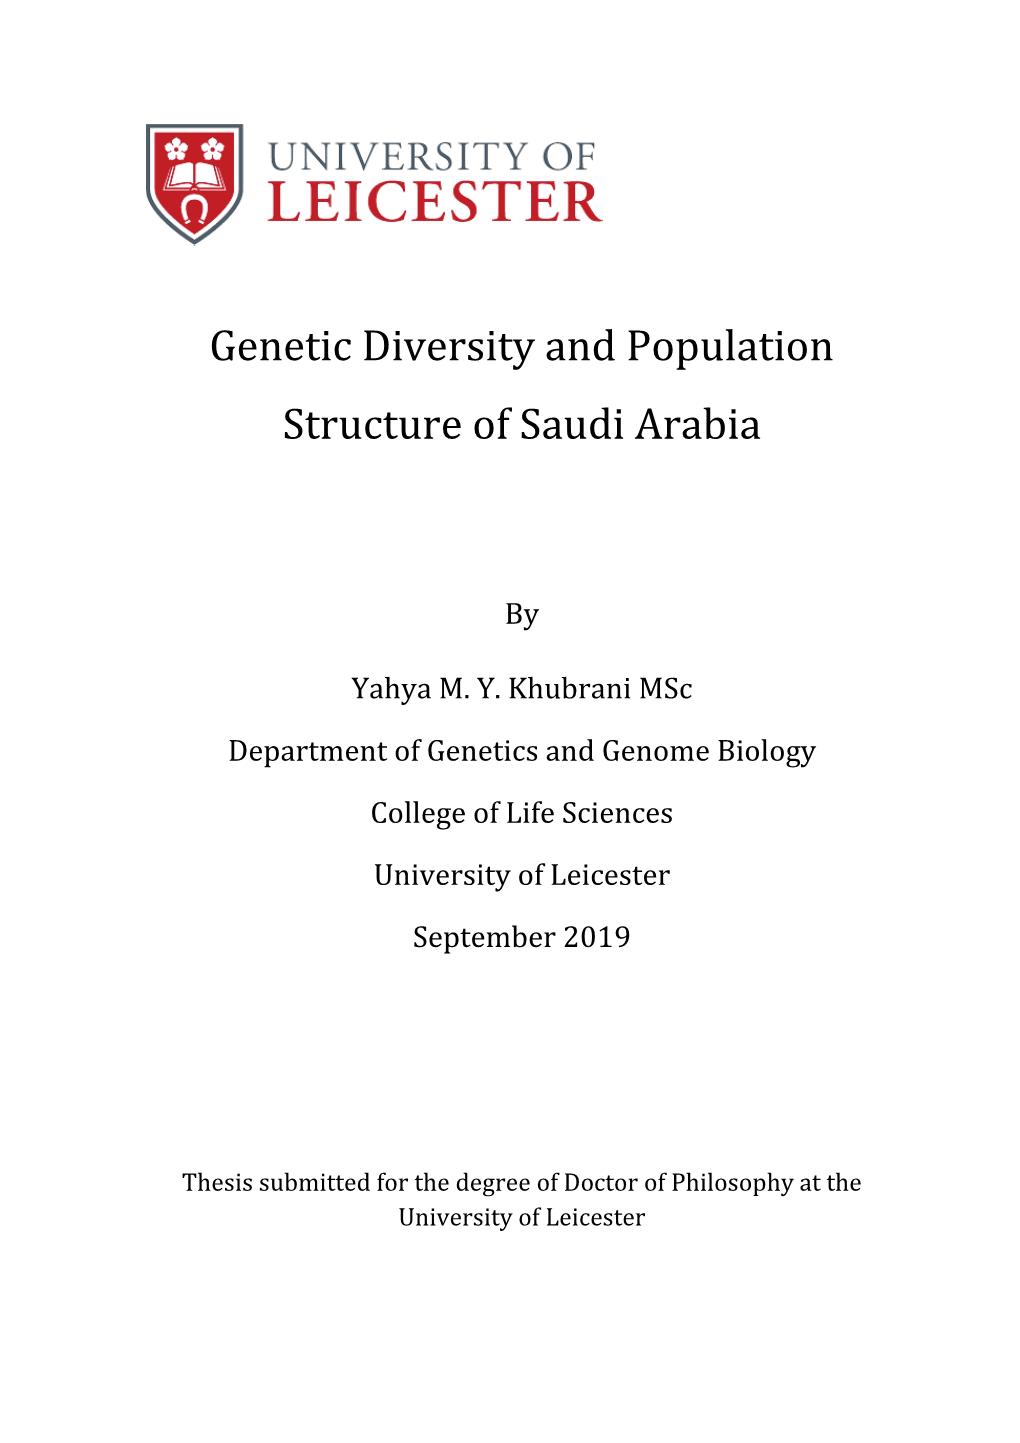 Genetic Diversity and Population Structure of Saudi Arabia